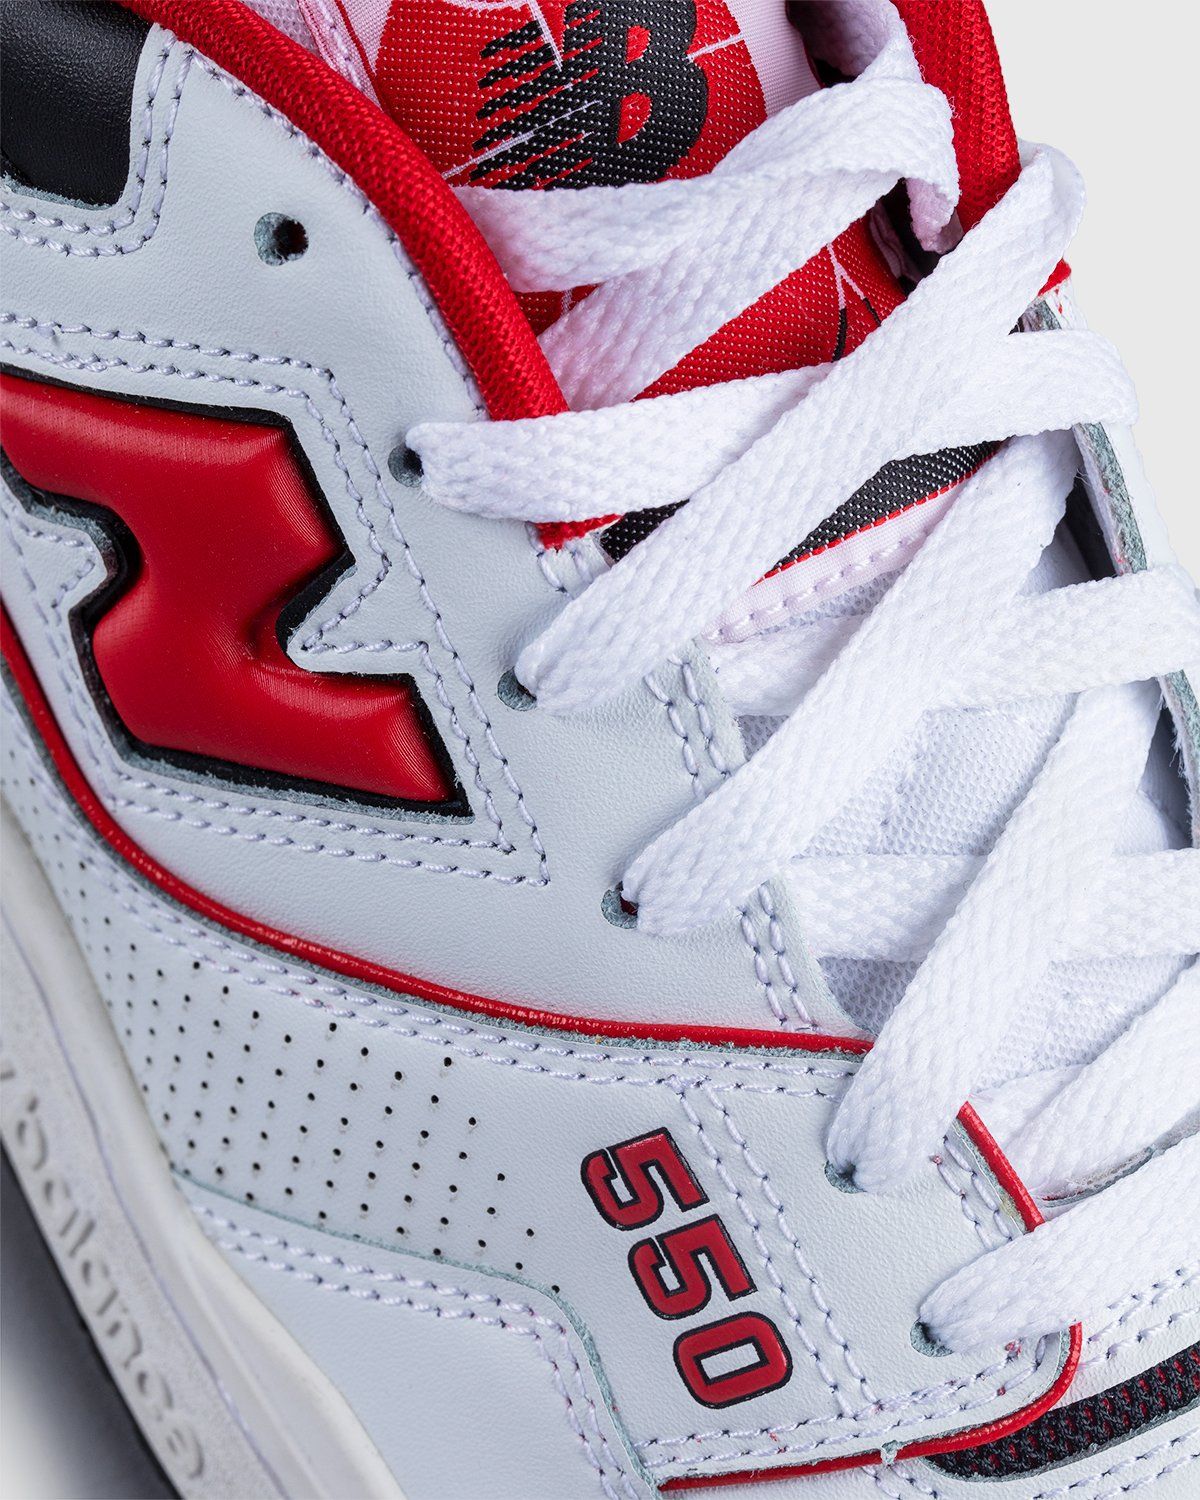 New Balance – BB550HR1 White Red Black - Low Top Sneakers - White - Image 6